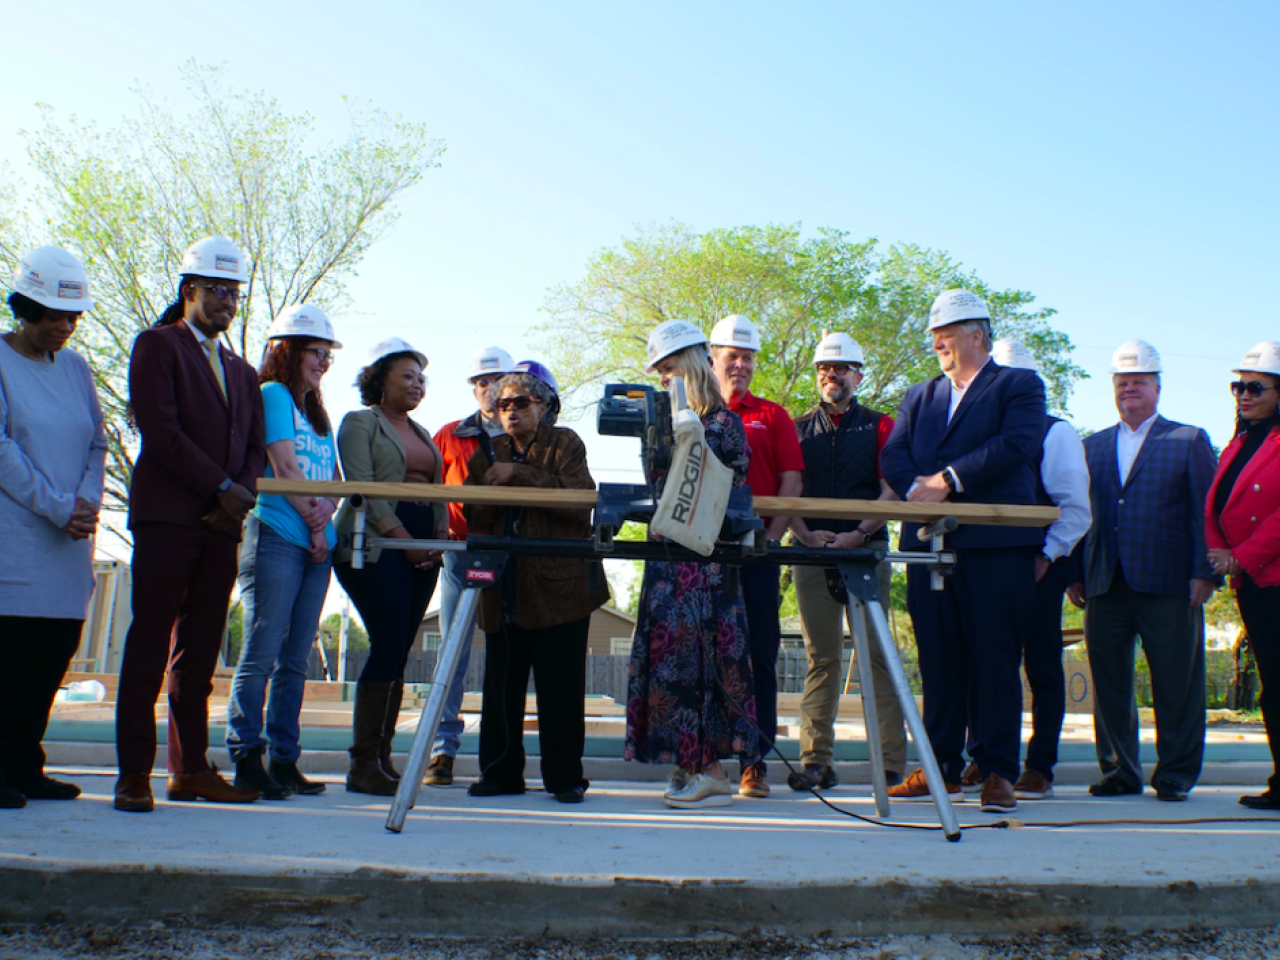 Texas Capital, Trinity Habitat for Humanity and HistoryMaker Homes have joined forces to rebuild the home of Dr. Opal Lee